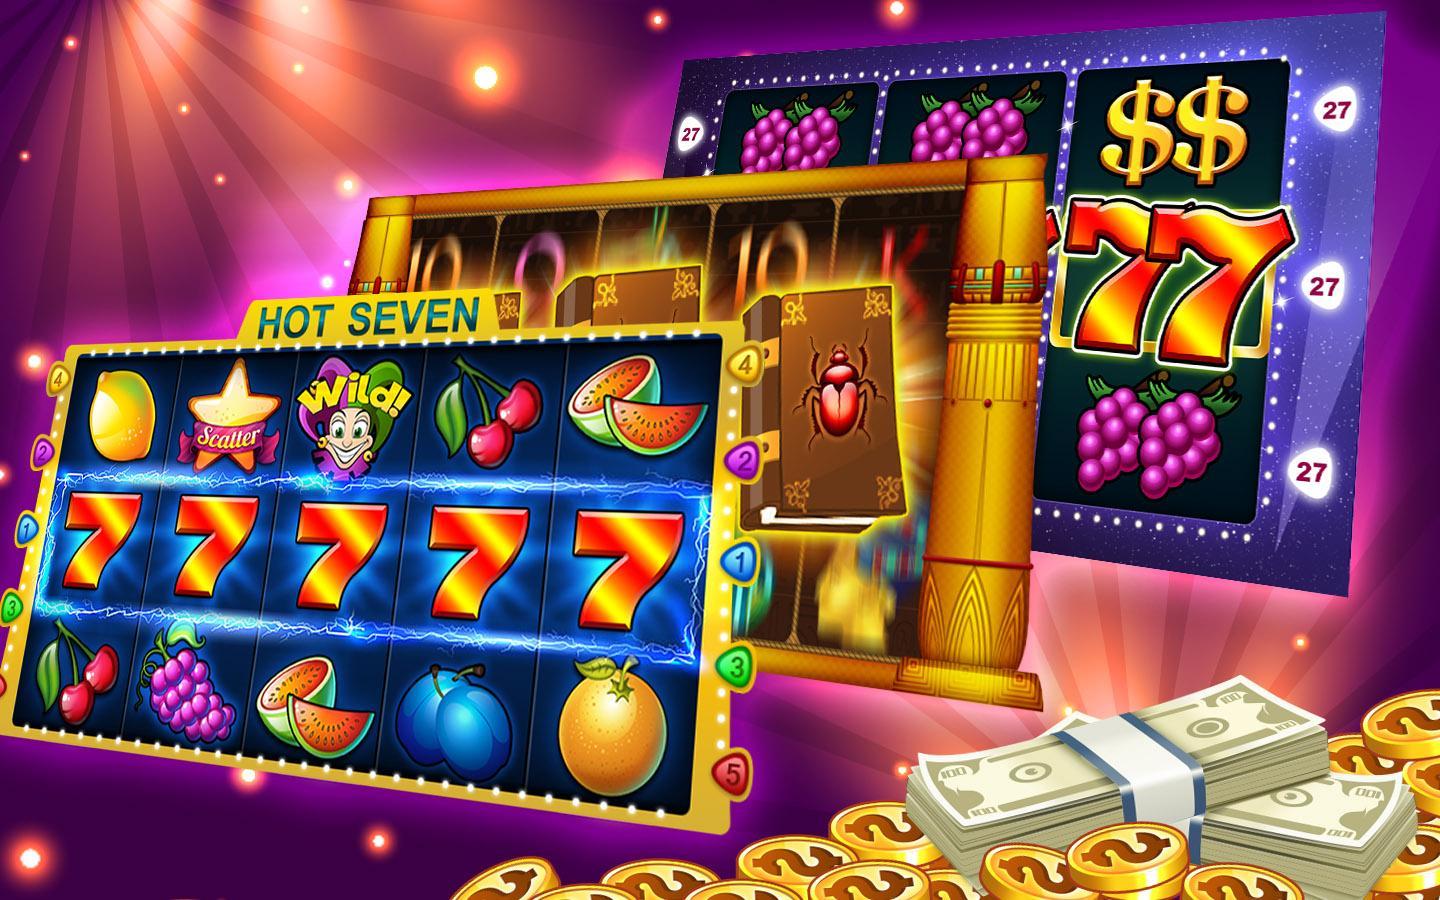 3 Tips to Win at Slot Machines